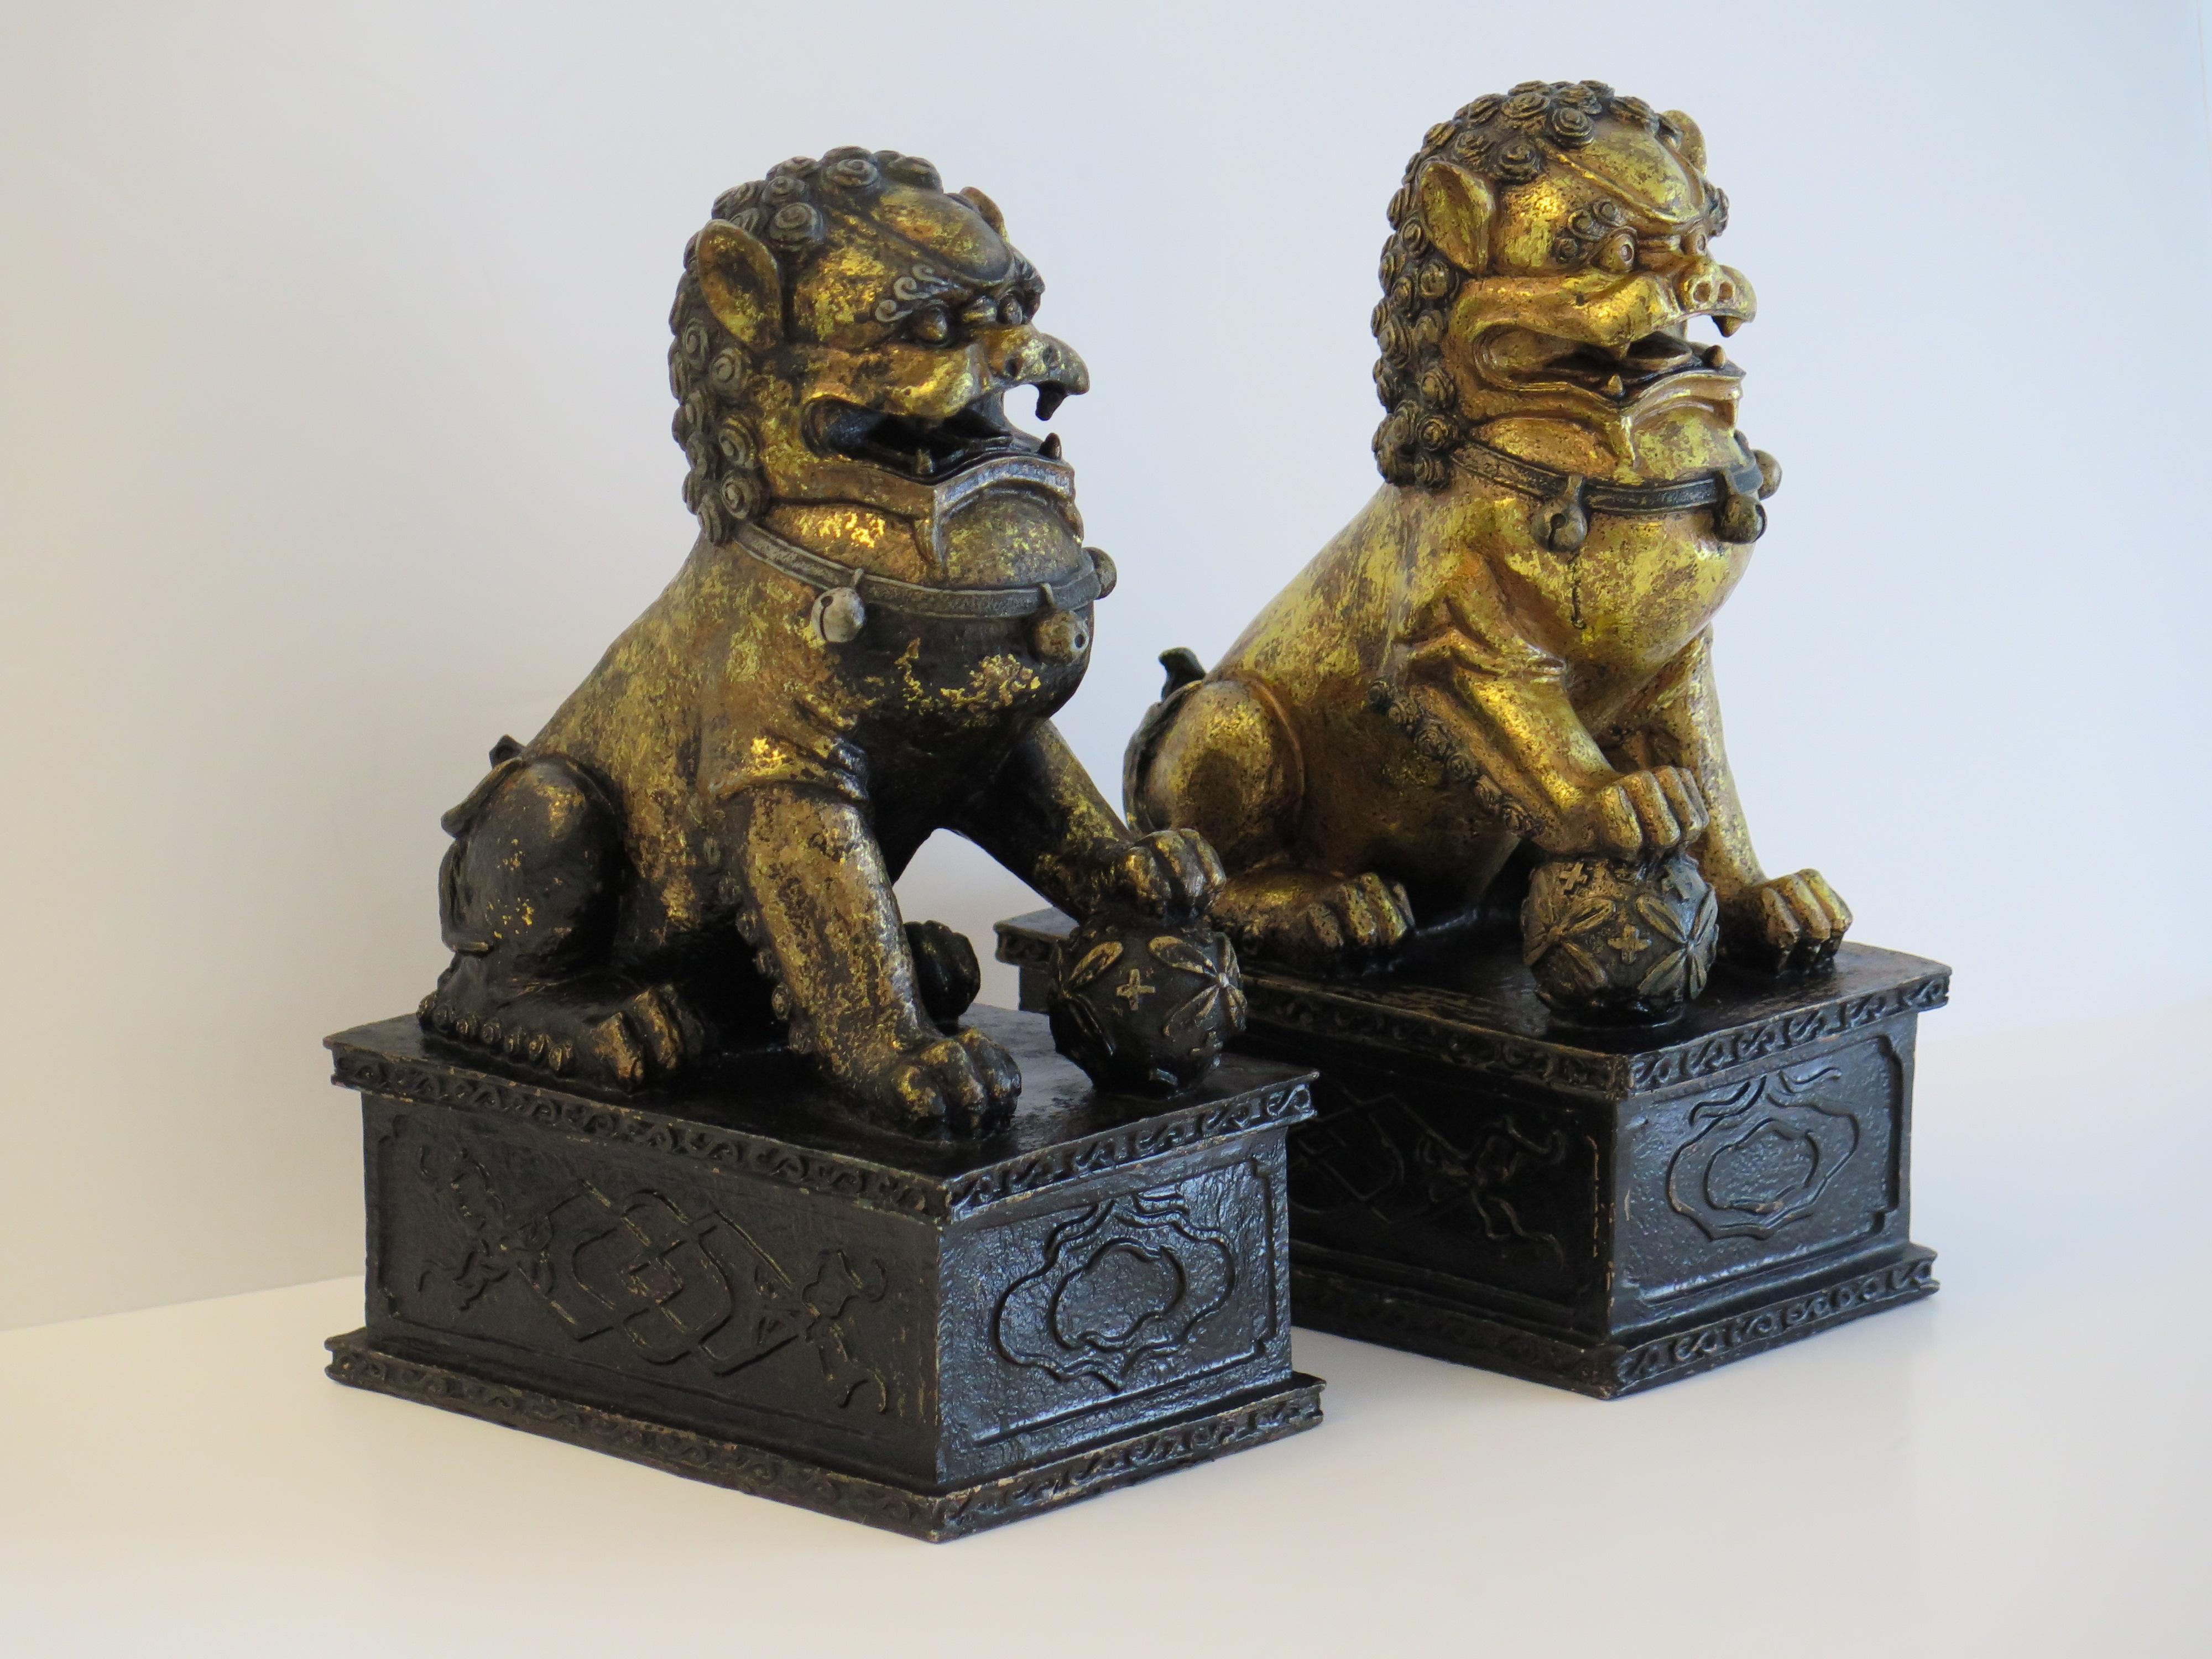 These are a very good Large pair of Chinese foo or lion dogs on plinth's, sometimes called temple lions made of metal and hand gilded with fine detail, all in the Ming style but dating to the 20th century, Circa 1920s period.

These are an unusually